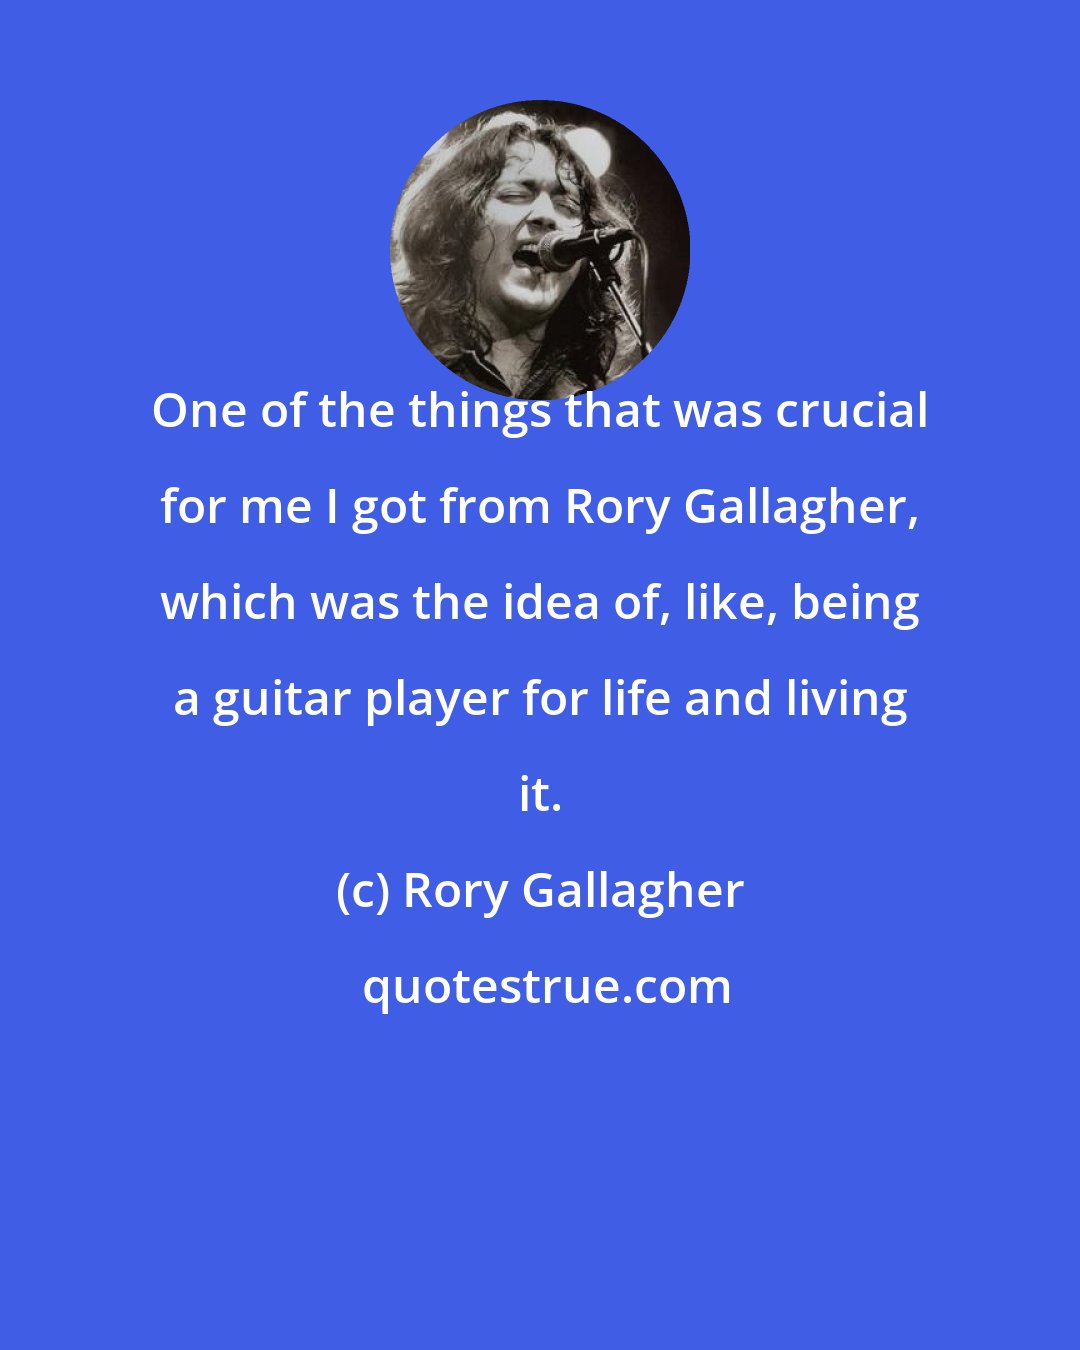 Rory Gallagher: One of the things that was crucial for me I got from Rory Gallagher, which was the idea of, like, being a guitar player for life and living it.